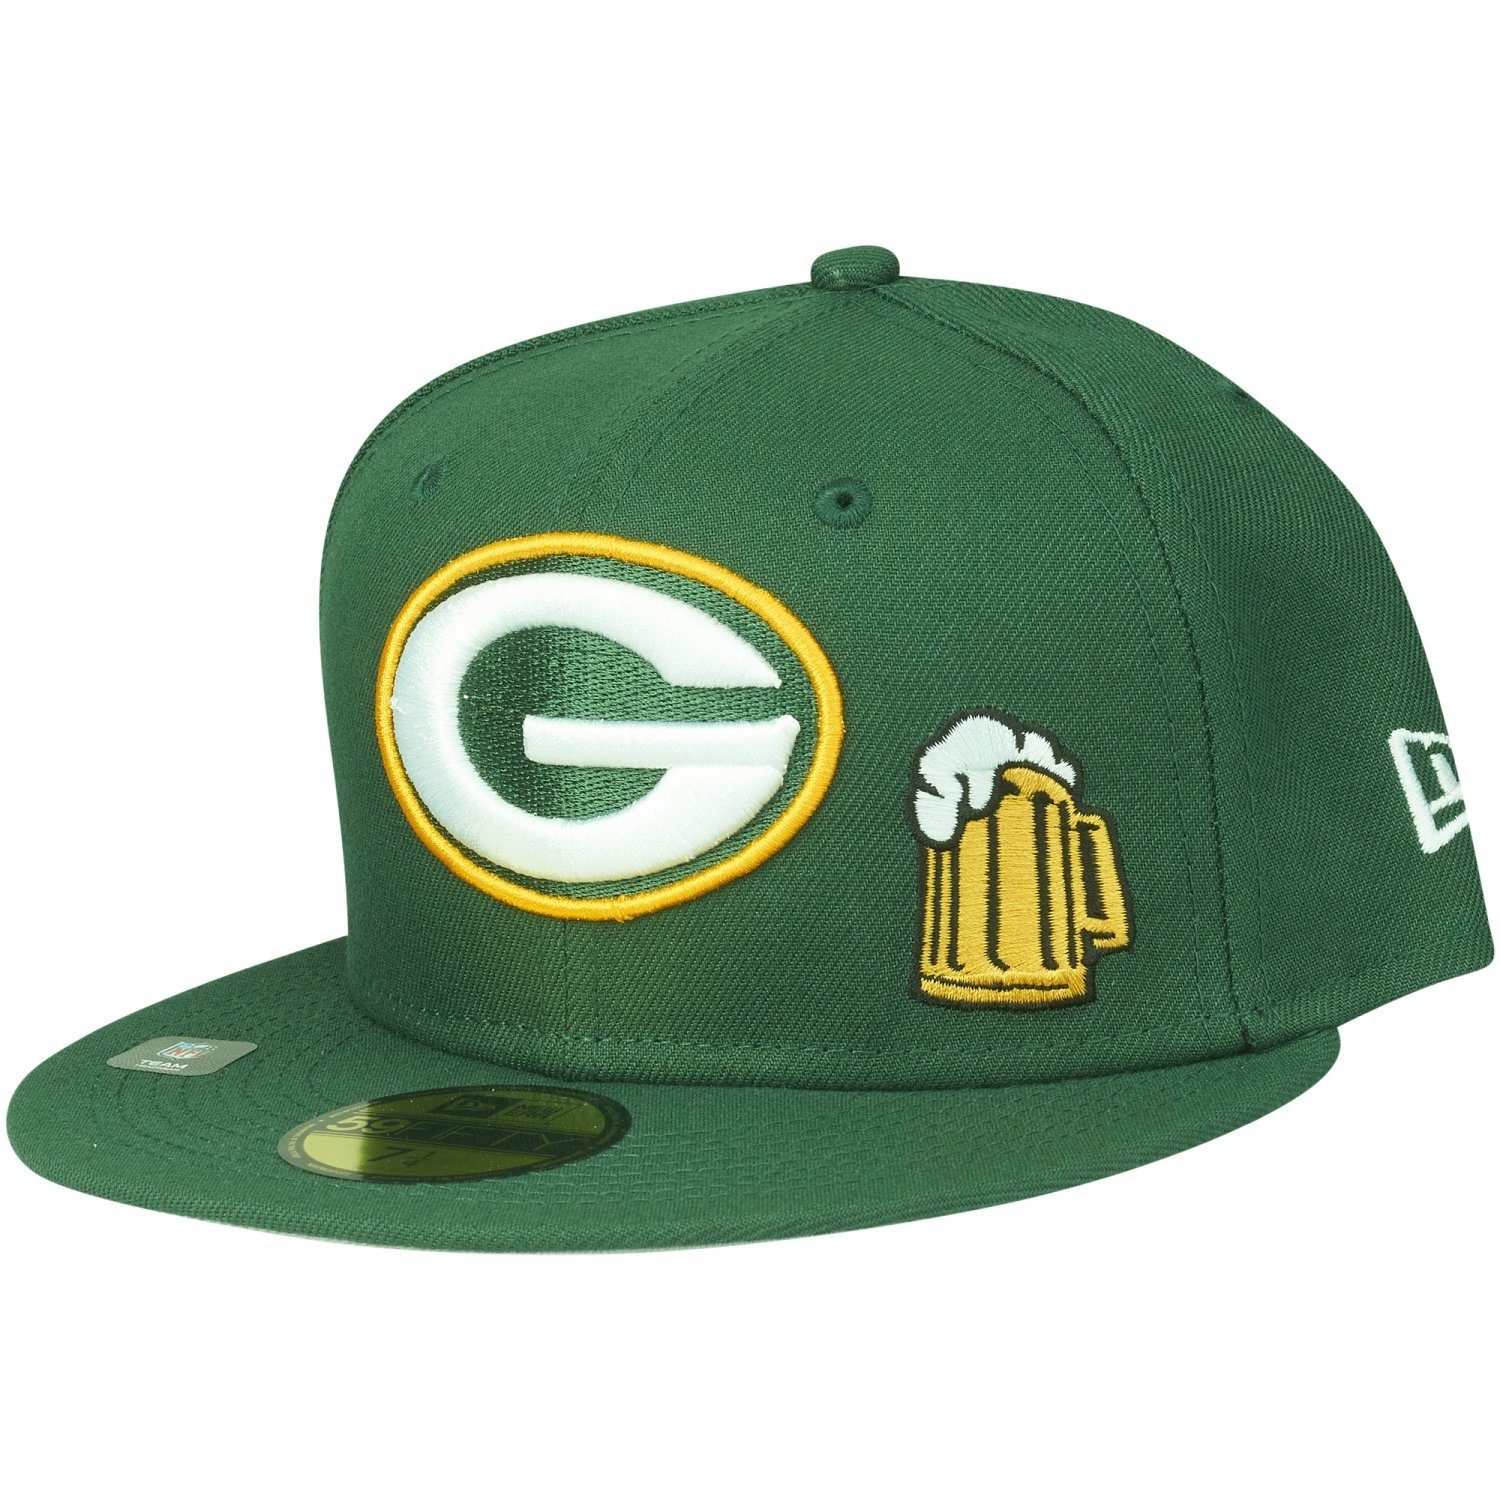 New Era Fitted Cap 59Fifty NFL CITY Green Bay Packers